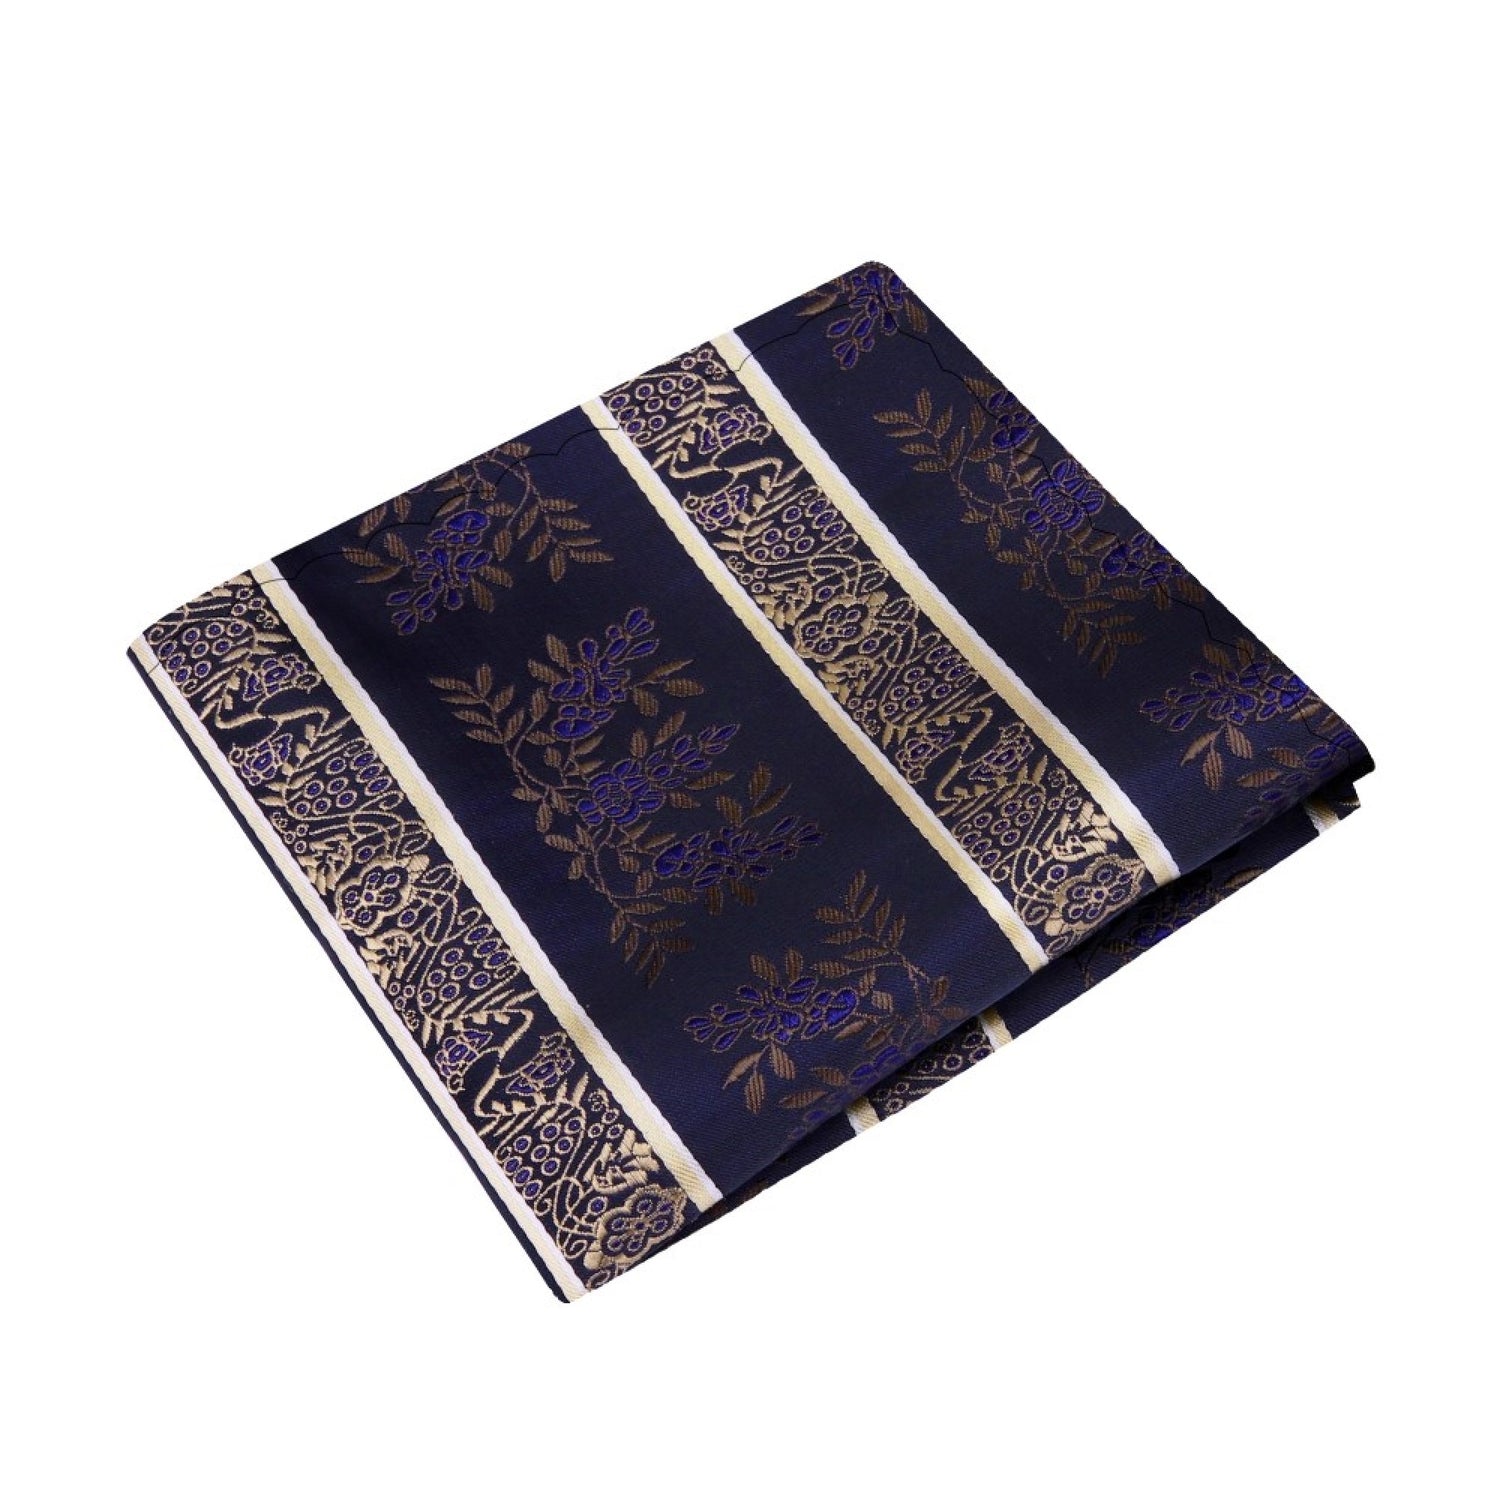 A Brown, Blue Intricate Floral Pattern Silk Pocket Square